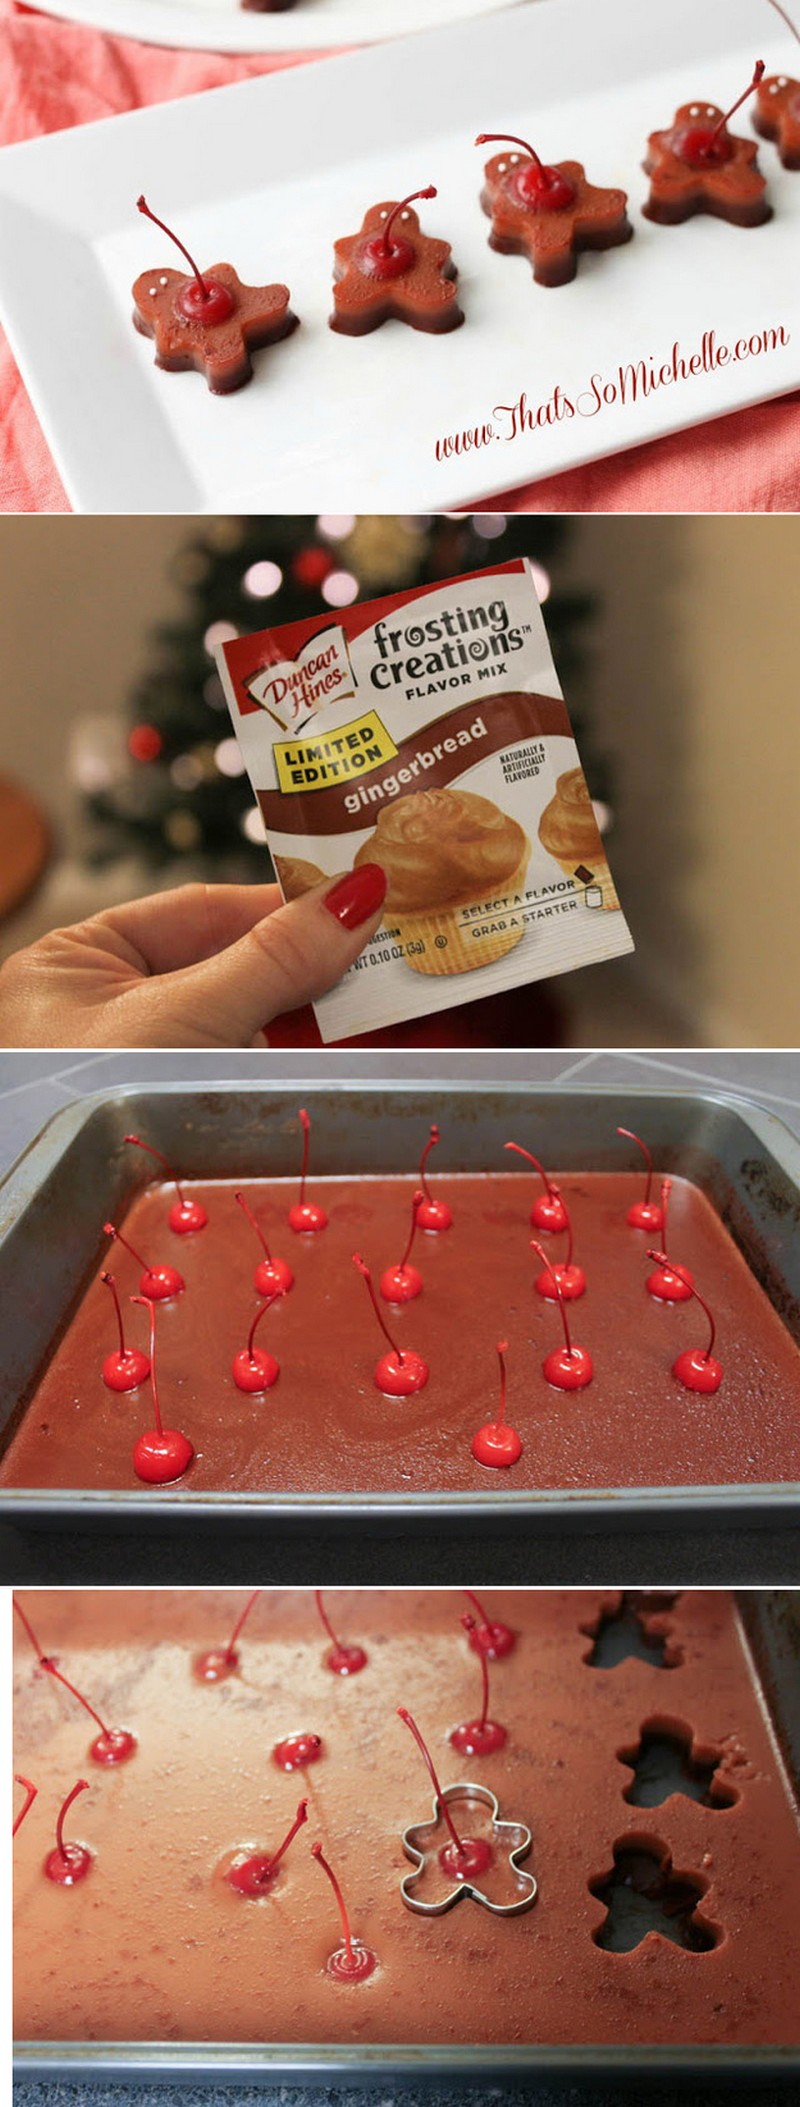 Use gingerbread frosting flavoring to make these adorable gingerbread man Jell-O shots